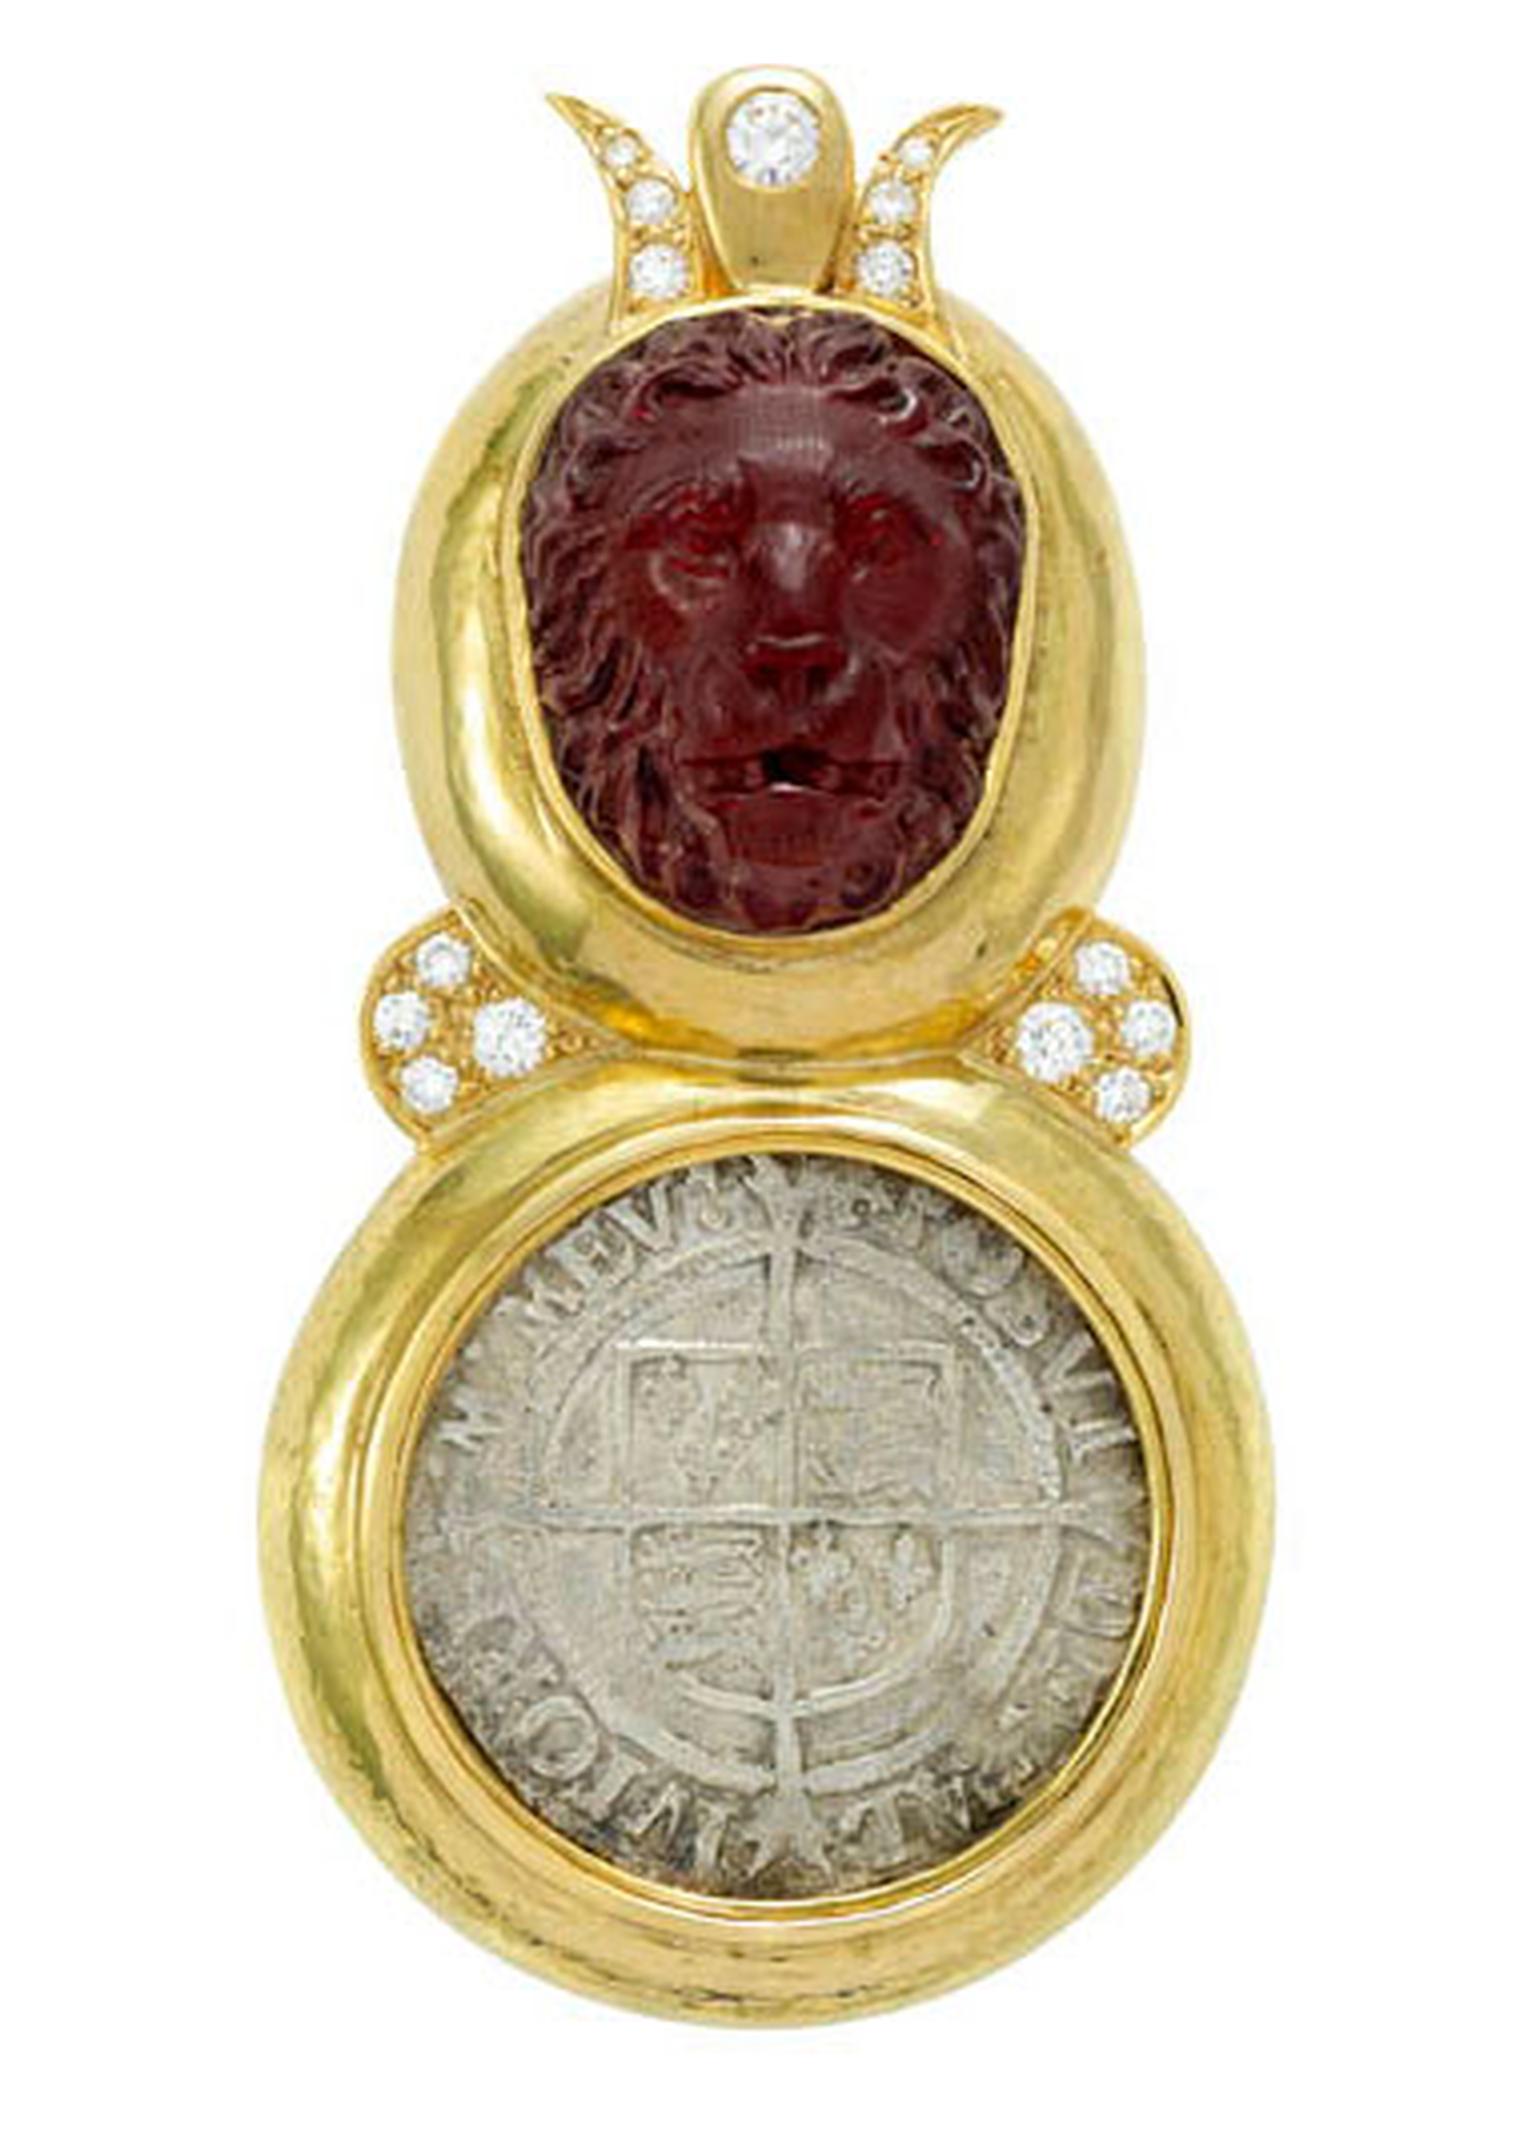 ELIZABETH GAGE, Arcadia Pin, this majestic Arcadia pin features a carved garnet lion head with a diamond crown set above an antique silver four pence coin, dating from the reign of Elizabeth I (1558-1603). The pin is decorated with diamonds. £11,400